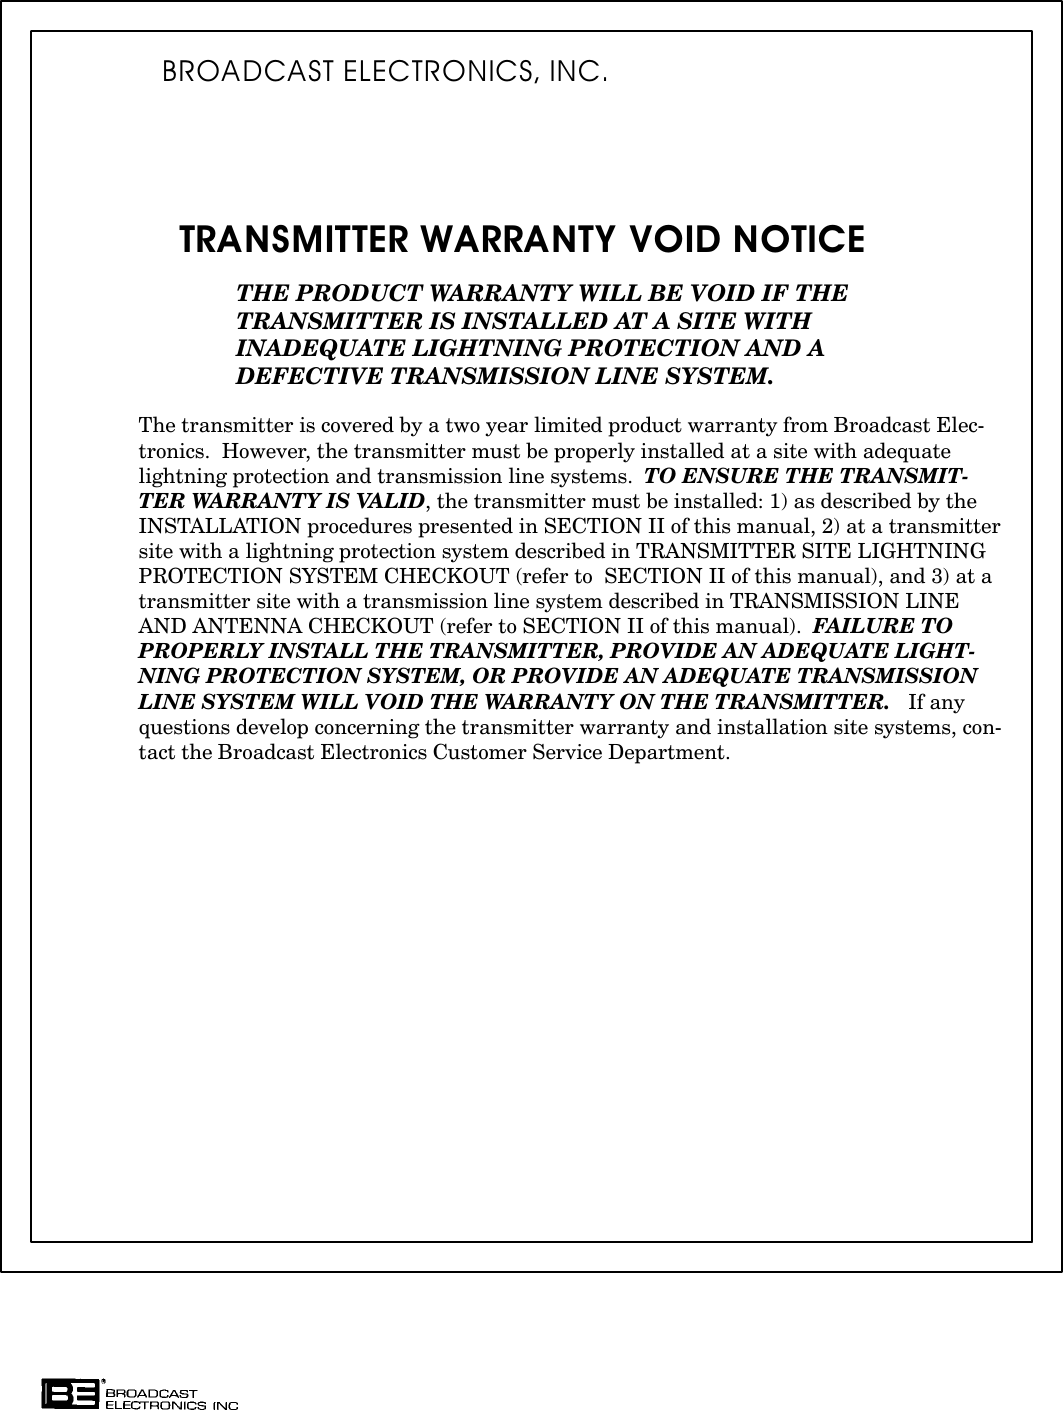 TRANSMITTER WARRANTY VOID NOTICETHE PRODUCT WARRANTY WILL BE VOID IF THE TRANSMITTER IS INSTALLED AT A SITE WITHINADEQUATE LIGHTNING PROTECTION AND A DEFECTIVE TRANSMISSION LINE SYSTEM.The transmitter is covered by a two year limited product warranty from Broadcast ElecĆtronics.  However, the transmitter must be properly installed at a site with adequatelightning protection and transmission line systems.  TO ENSURE THE TRANSMITĆTER WARRANTY IS VALID, the transmitter must be installed: 1) as described by theINSTALLATION procedures presented in SECTION II of this manual, 2) at a transmittersite with a lightning protection system described in TRANSMITTER SITE LIGHTNINGPROTECTION SYSTEM CHECKOUT (refer to  SECTION II of this manual), and 3) at atransmitter site with a transmission line system described in TRANSMISSION LINEAND ANTENNA CHECKOUT (refer to SECTION II of this manual).  FAILURE TOPROPERLY INSTALL THE TRANSMITTER, PROVIDE AN ADEQUATE LIGHTĆNING PROTECTION SYSTEM, OR PROVIDE AN ADEQUATE TRANSMISSIONLINE SYSTEM WILL VOID THE WARRANTY ON THE TRANSMITTER.   If anyquestions develop concerning the transmitter warranty and installation site systems, conĆtact the Broadcast Electronics Customer Service Department.BROADCAST ELECTRONICS, INC.